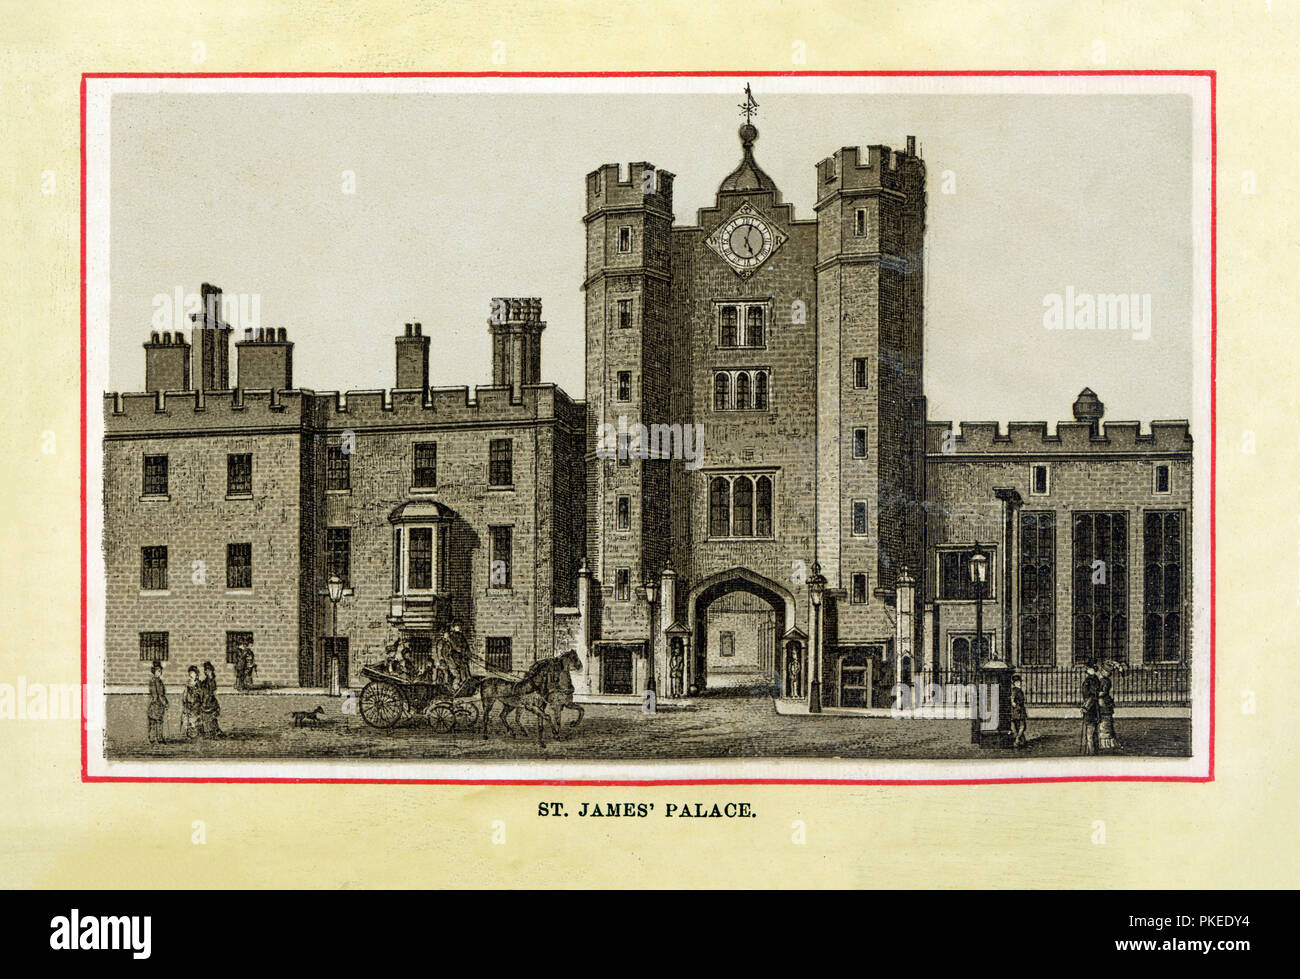 St James Palace, 1880 high quality steel engraving of the Tudor royal palace built by King Henry VIII on the site of a former leper colony at the junction of St James’s Street and Pall Mall Stock Photo